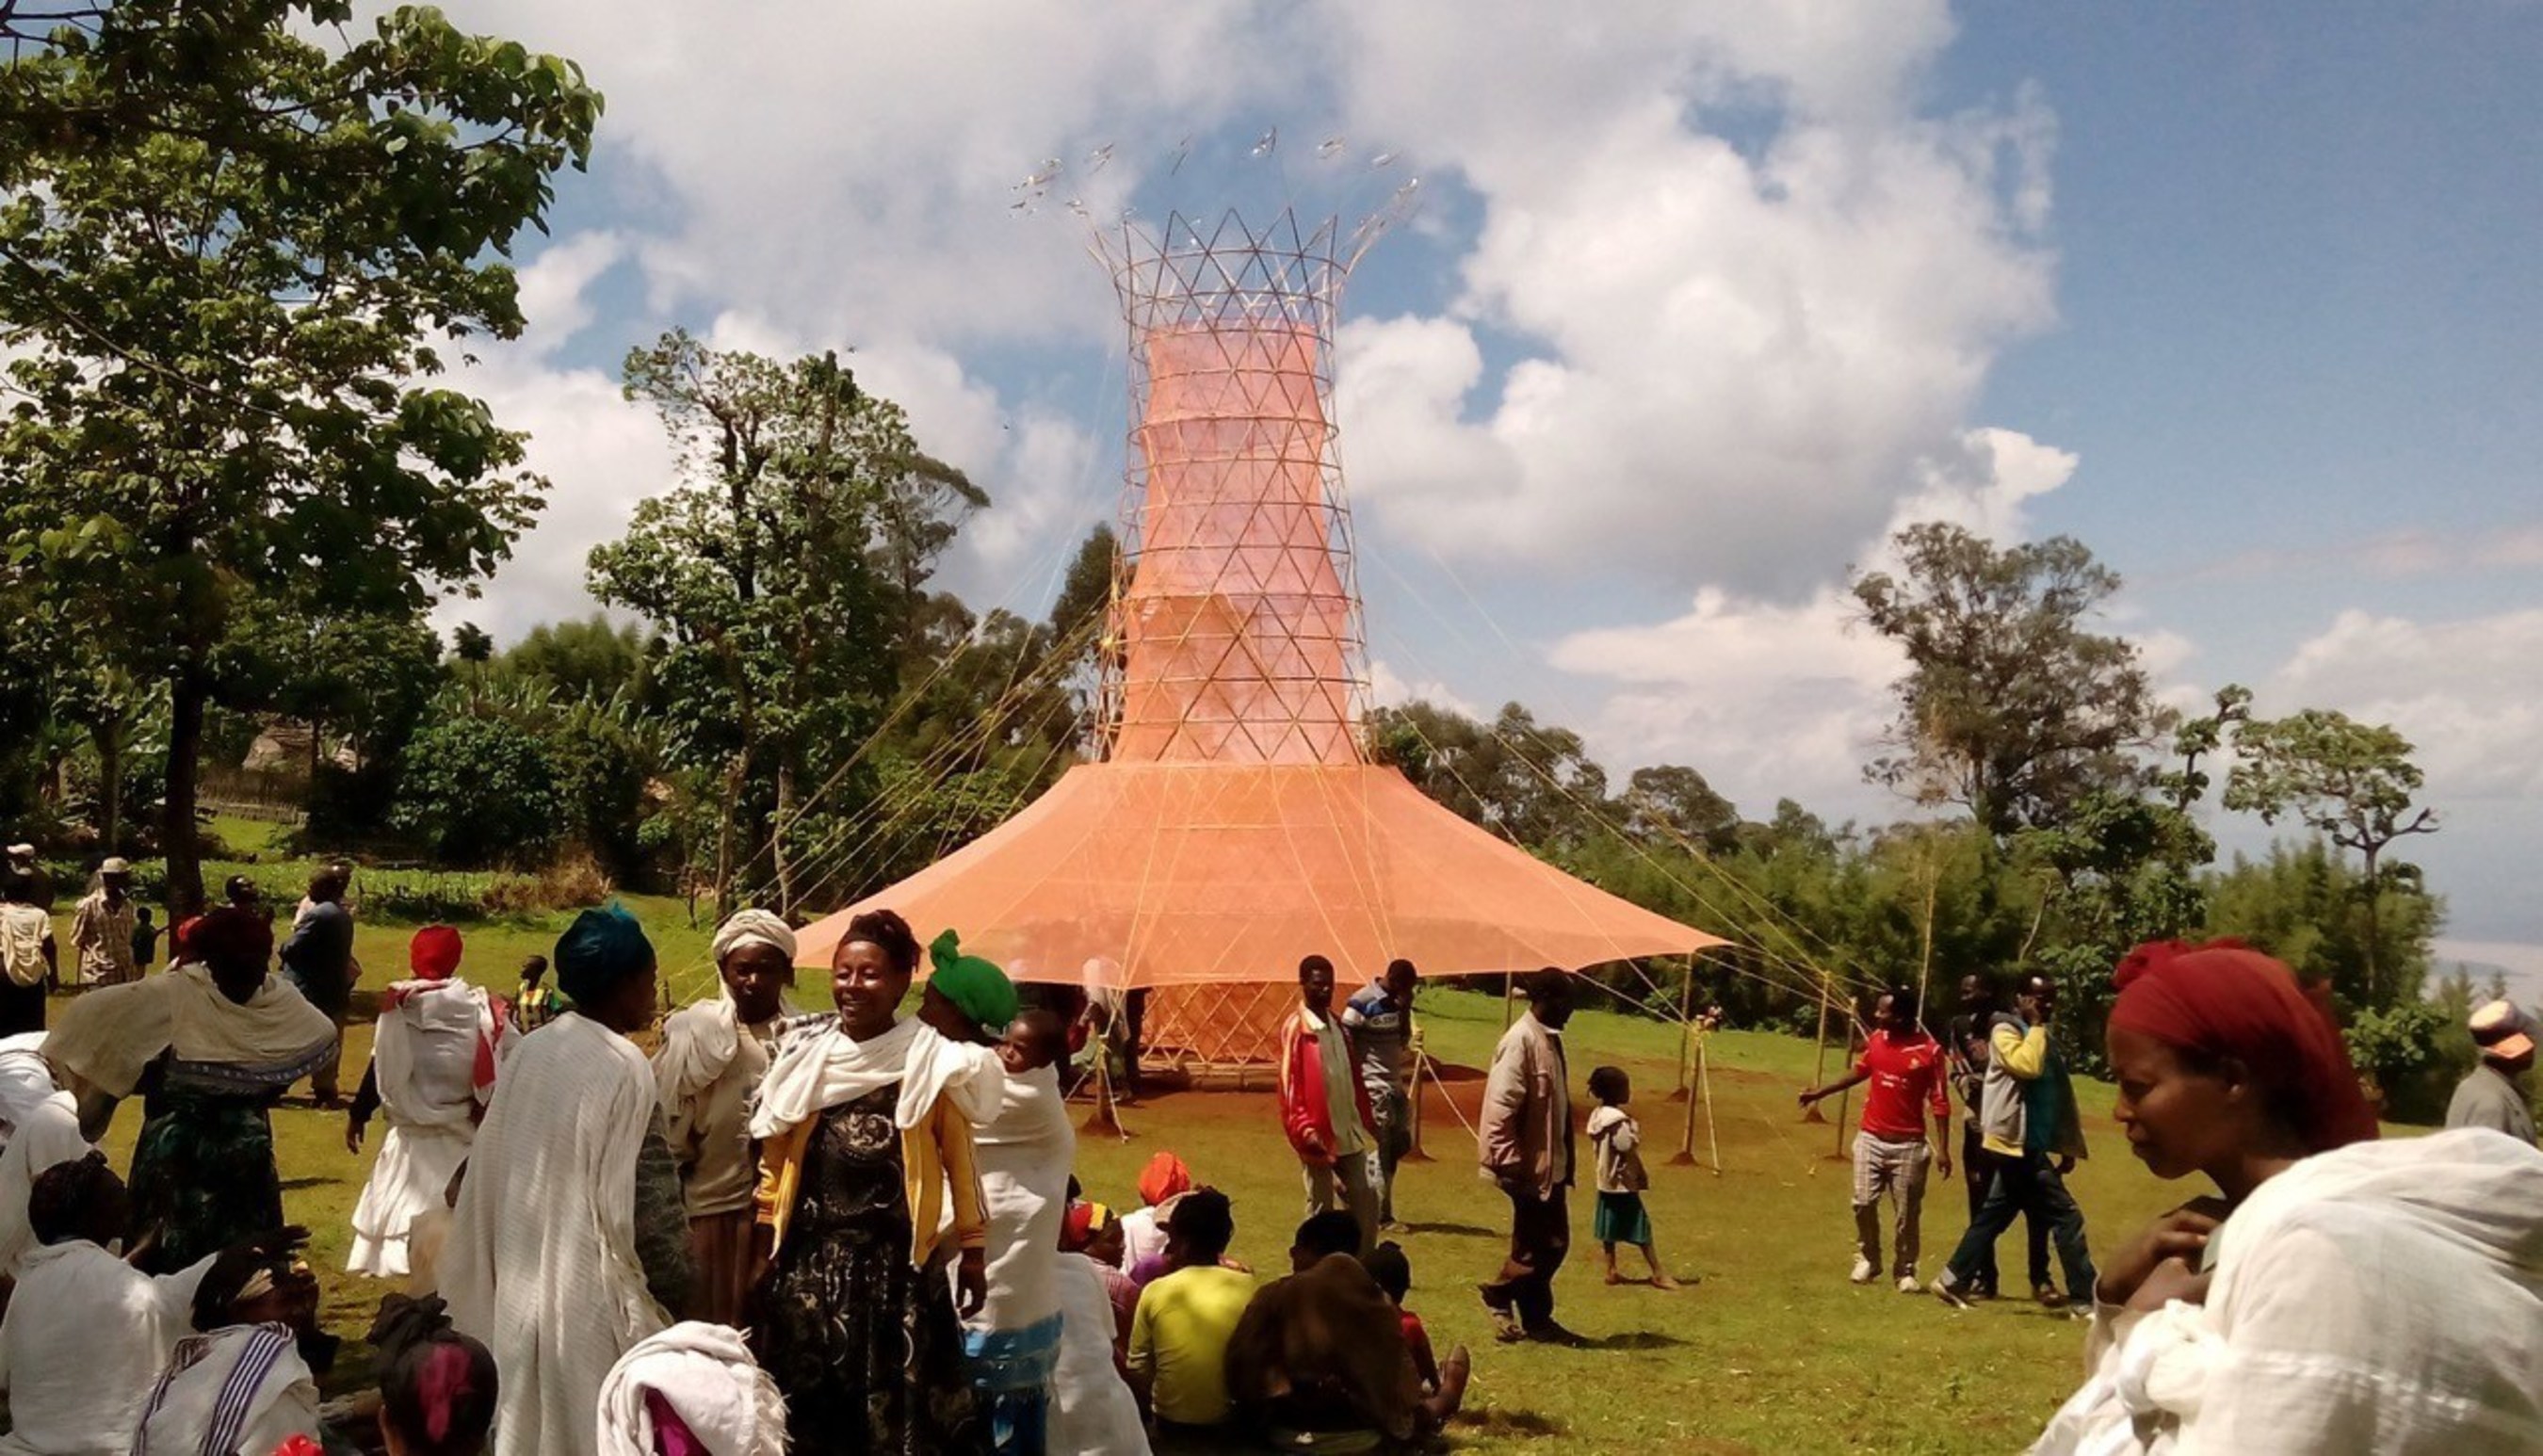 On­site view of Warka Water (Ethiopia). Warka Water took home the WDIP 2015­2016 trophy at the WDC Taipei 2016 International Design Gala. Image courtesy WDC Taipei 2016.